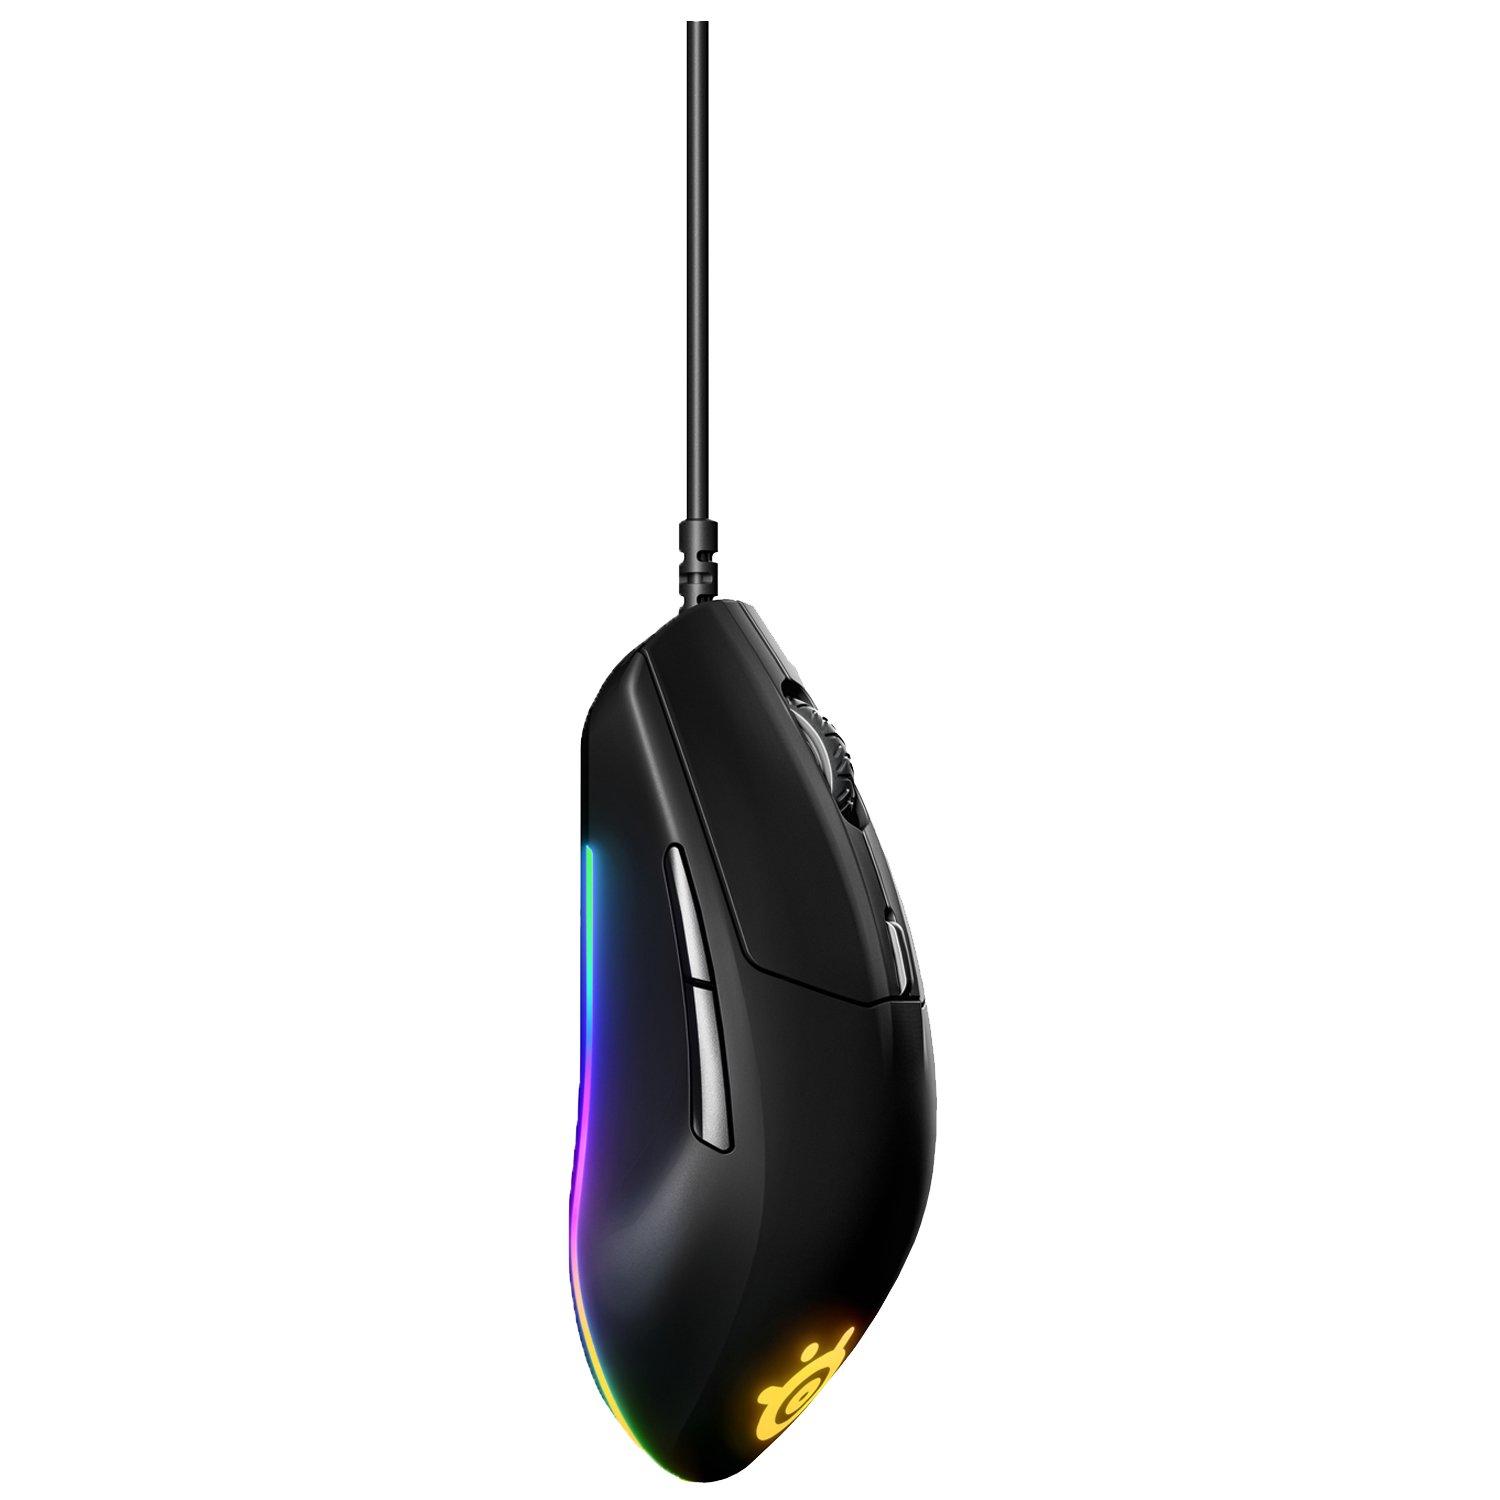 SteelSeries Rival 3 Wireless Mouse ergonomic right handed optical